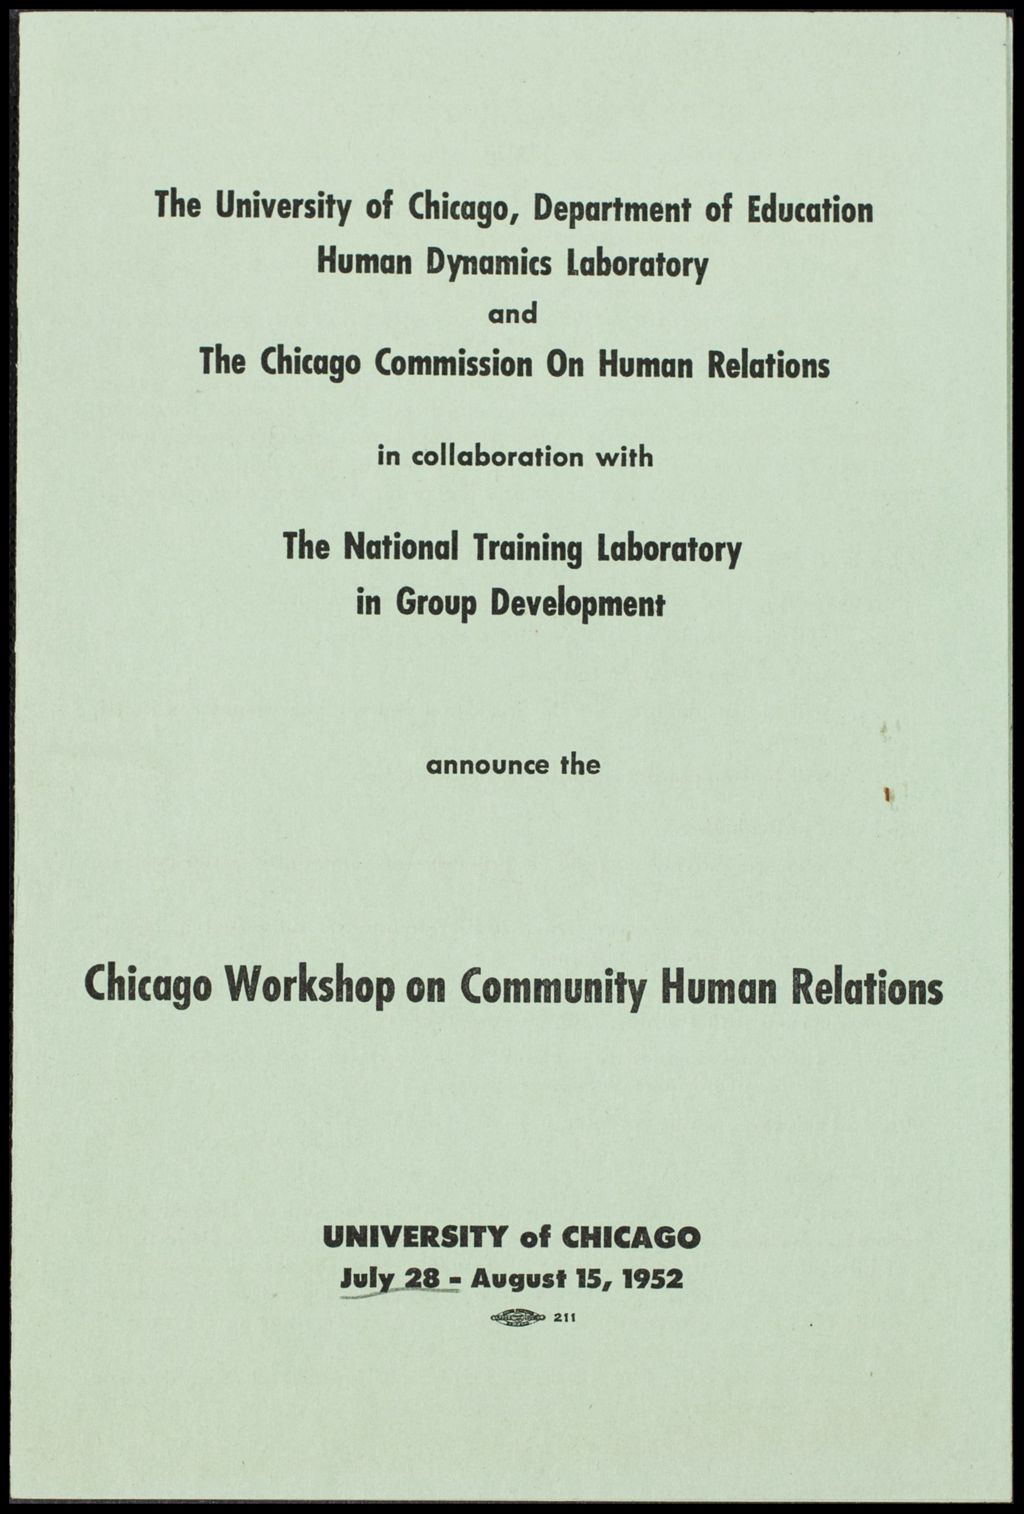 Miniature of Chicago Commission on Human Relations, 1952-1955 (Folder I-2797)